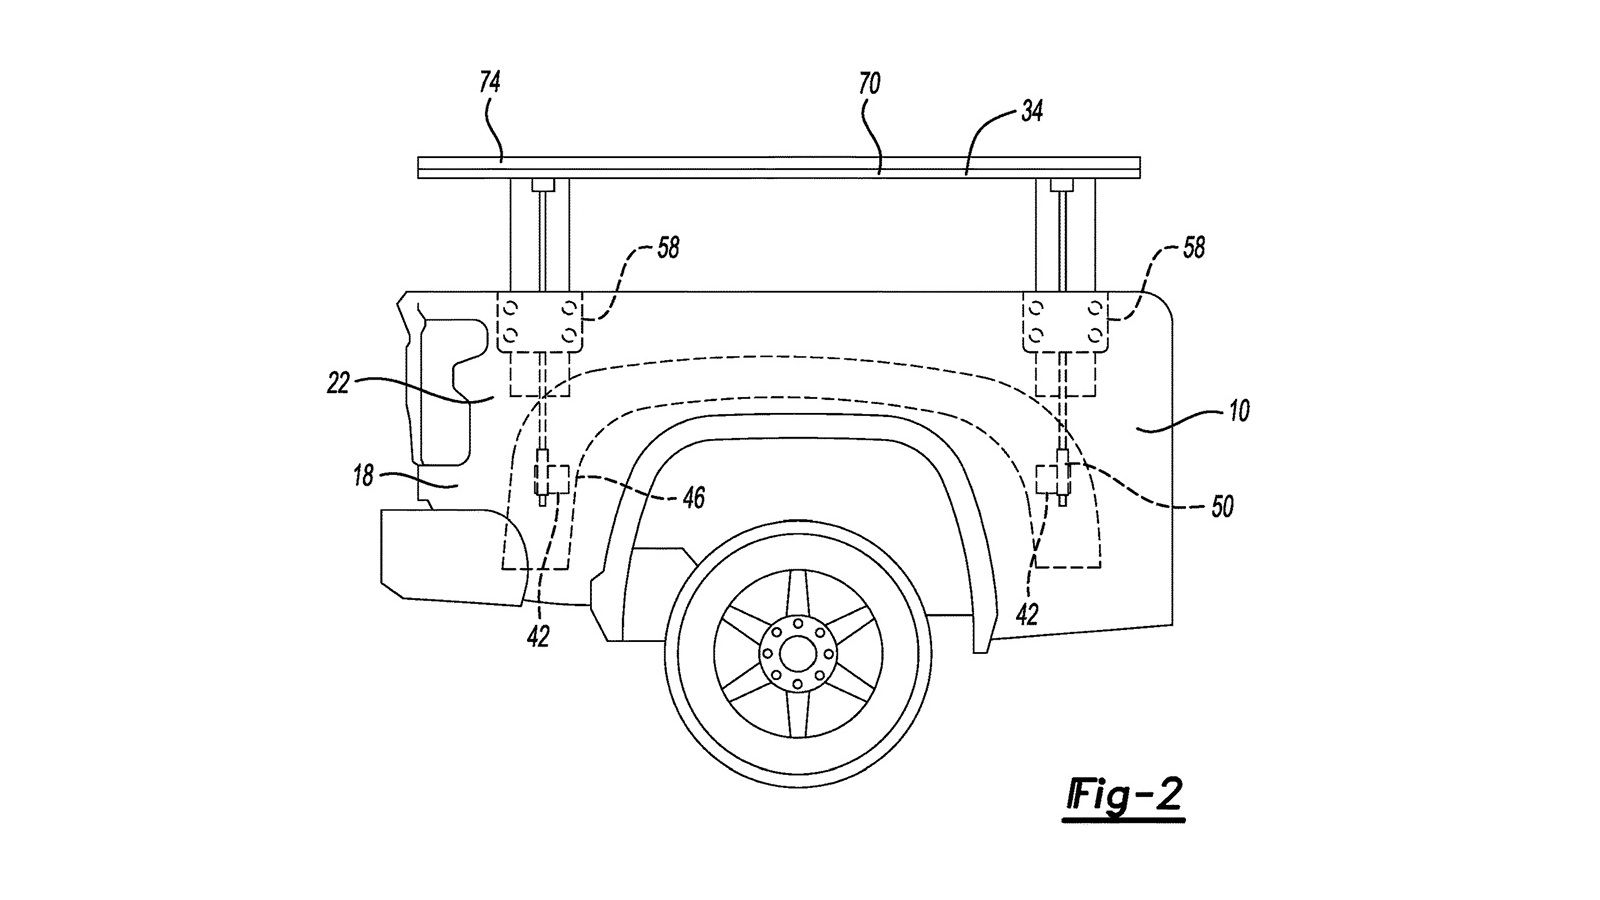 Patent imagery for Ford